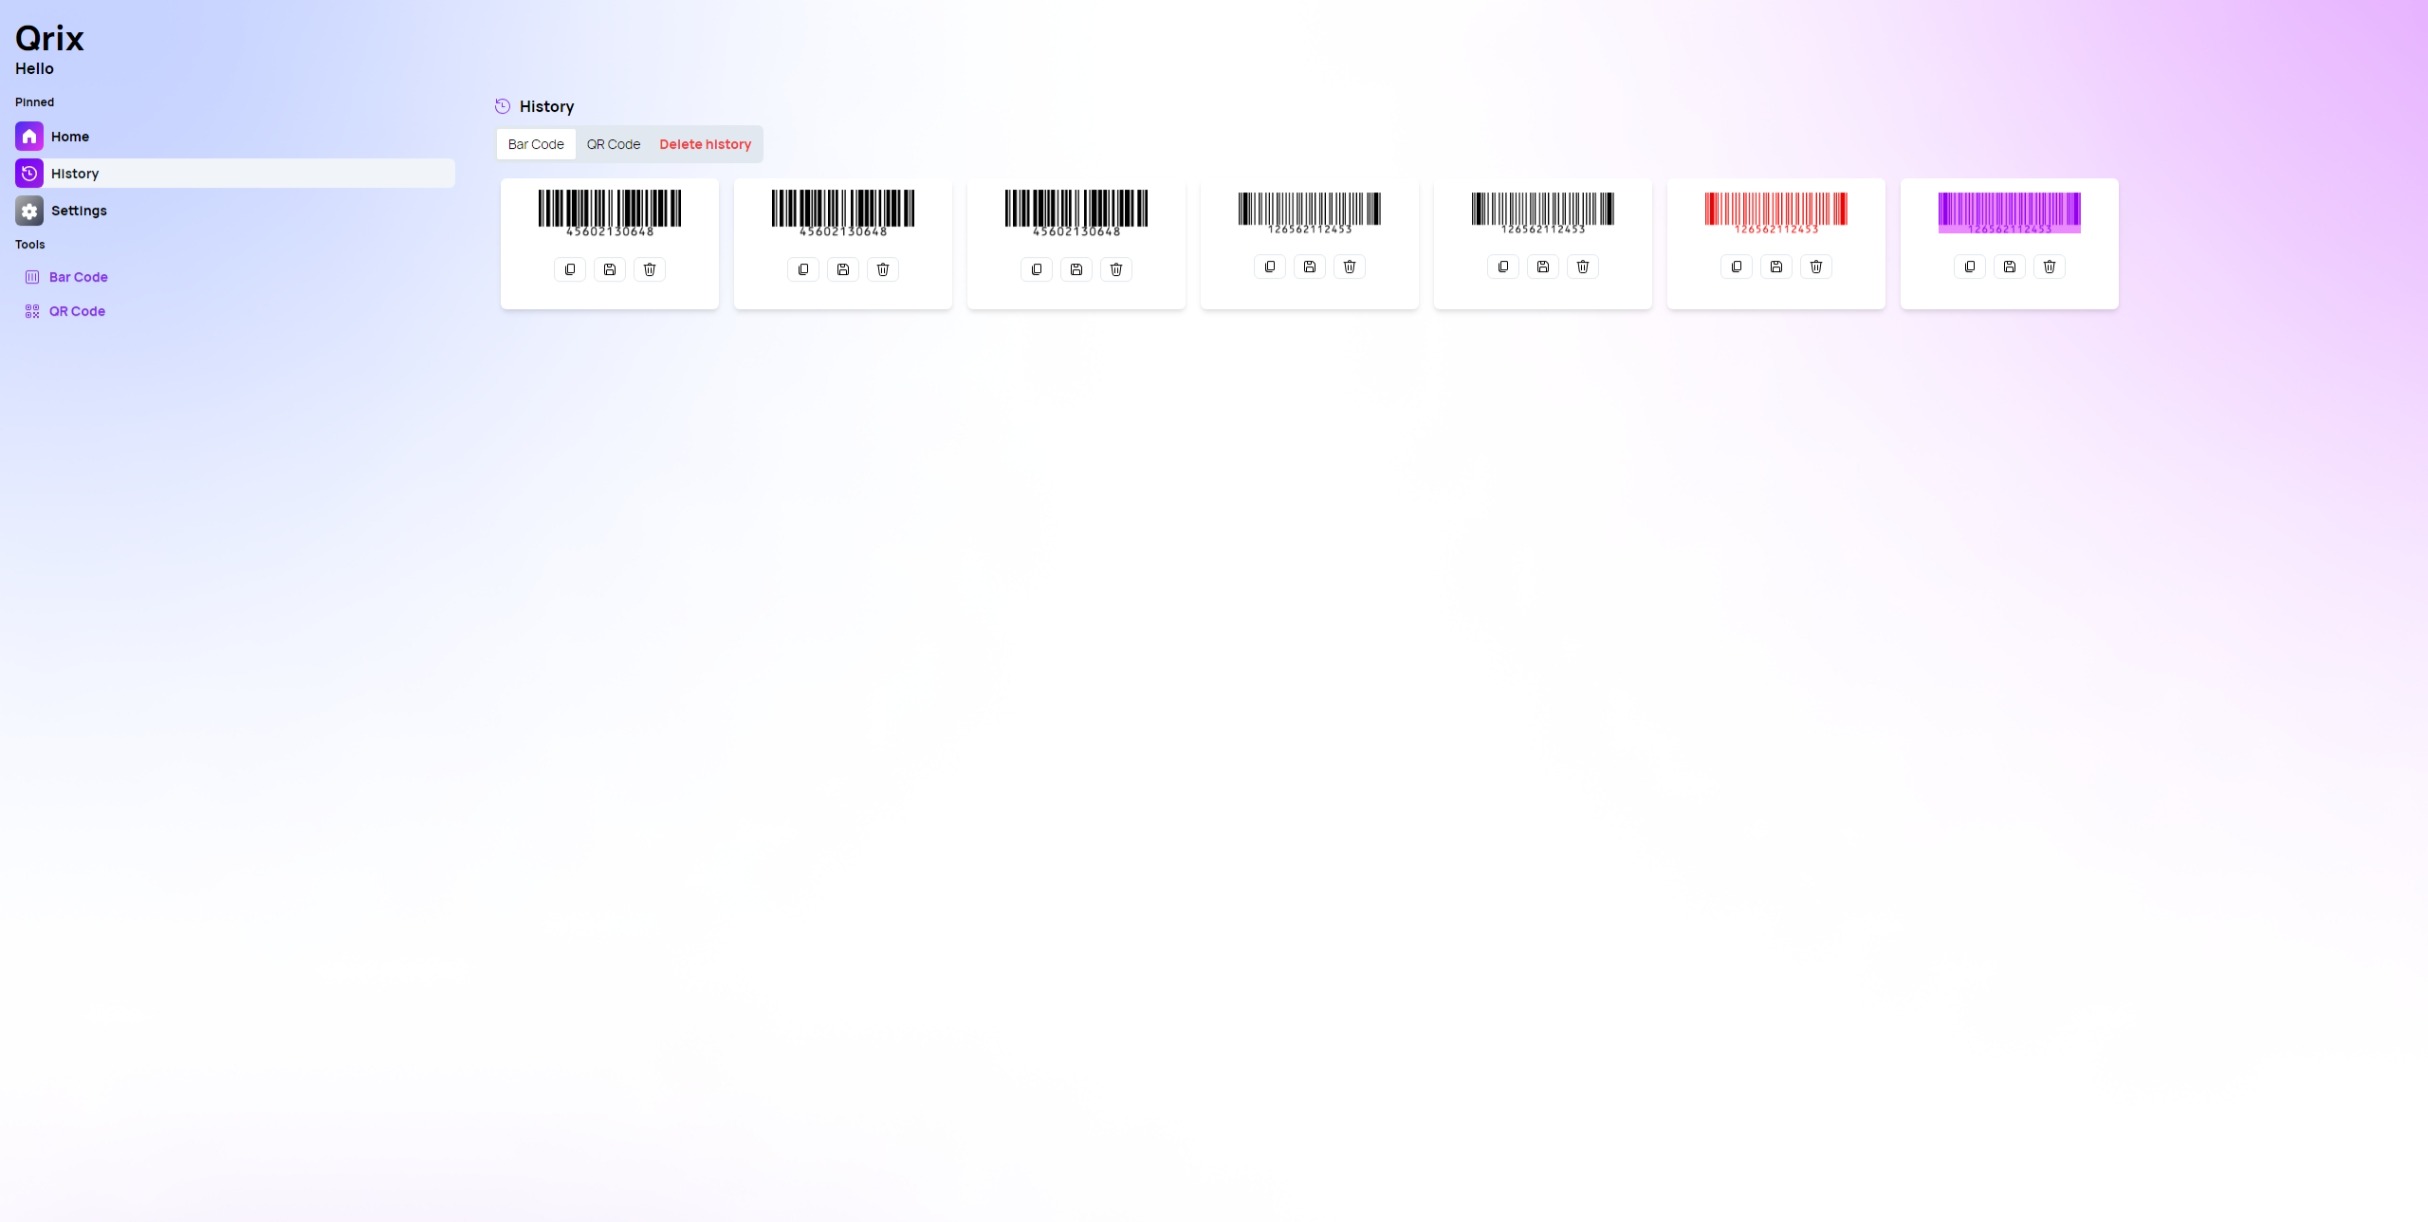 The History page showing the recently generated Bar Codes.